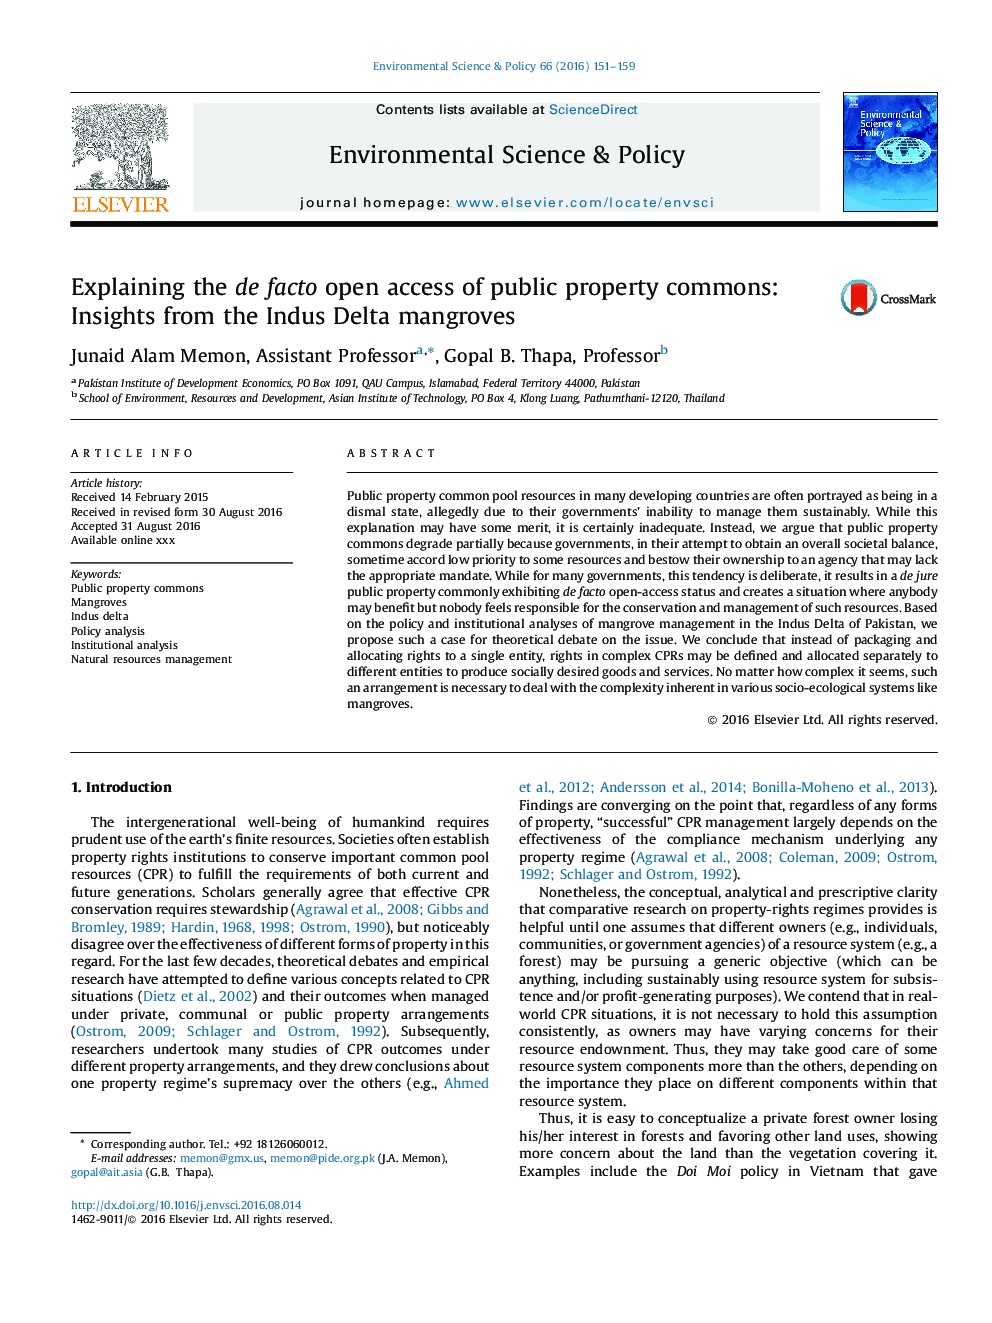 Explaining the de facto open access of public property commons: Insights from the Indus Delta mangroves